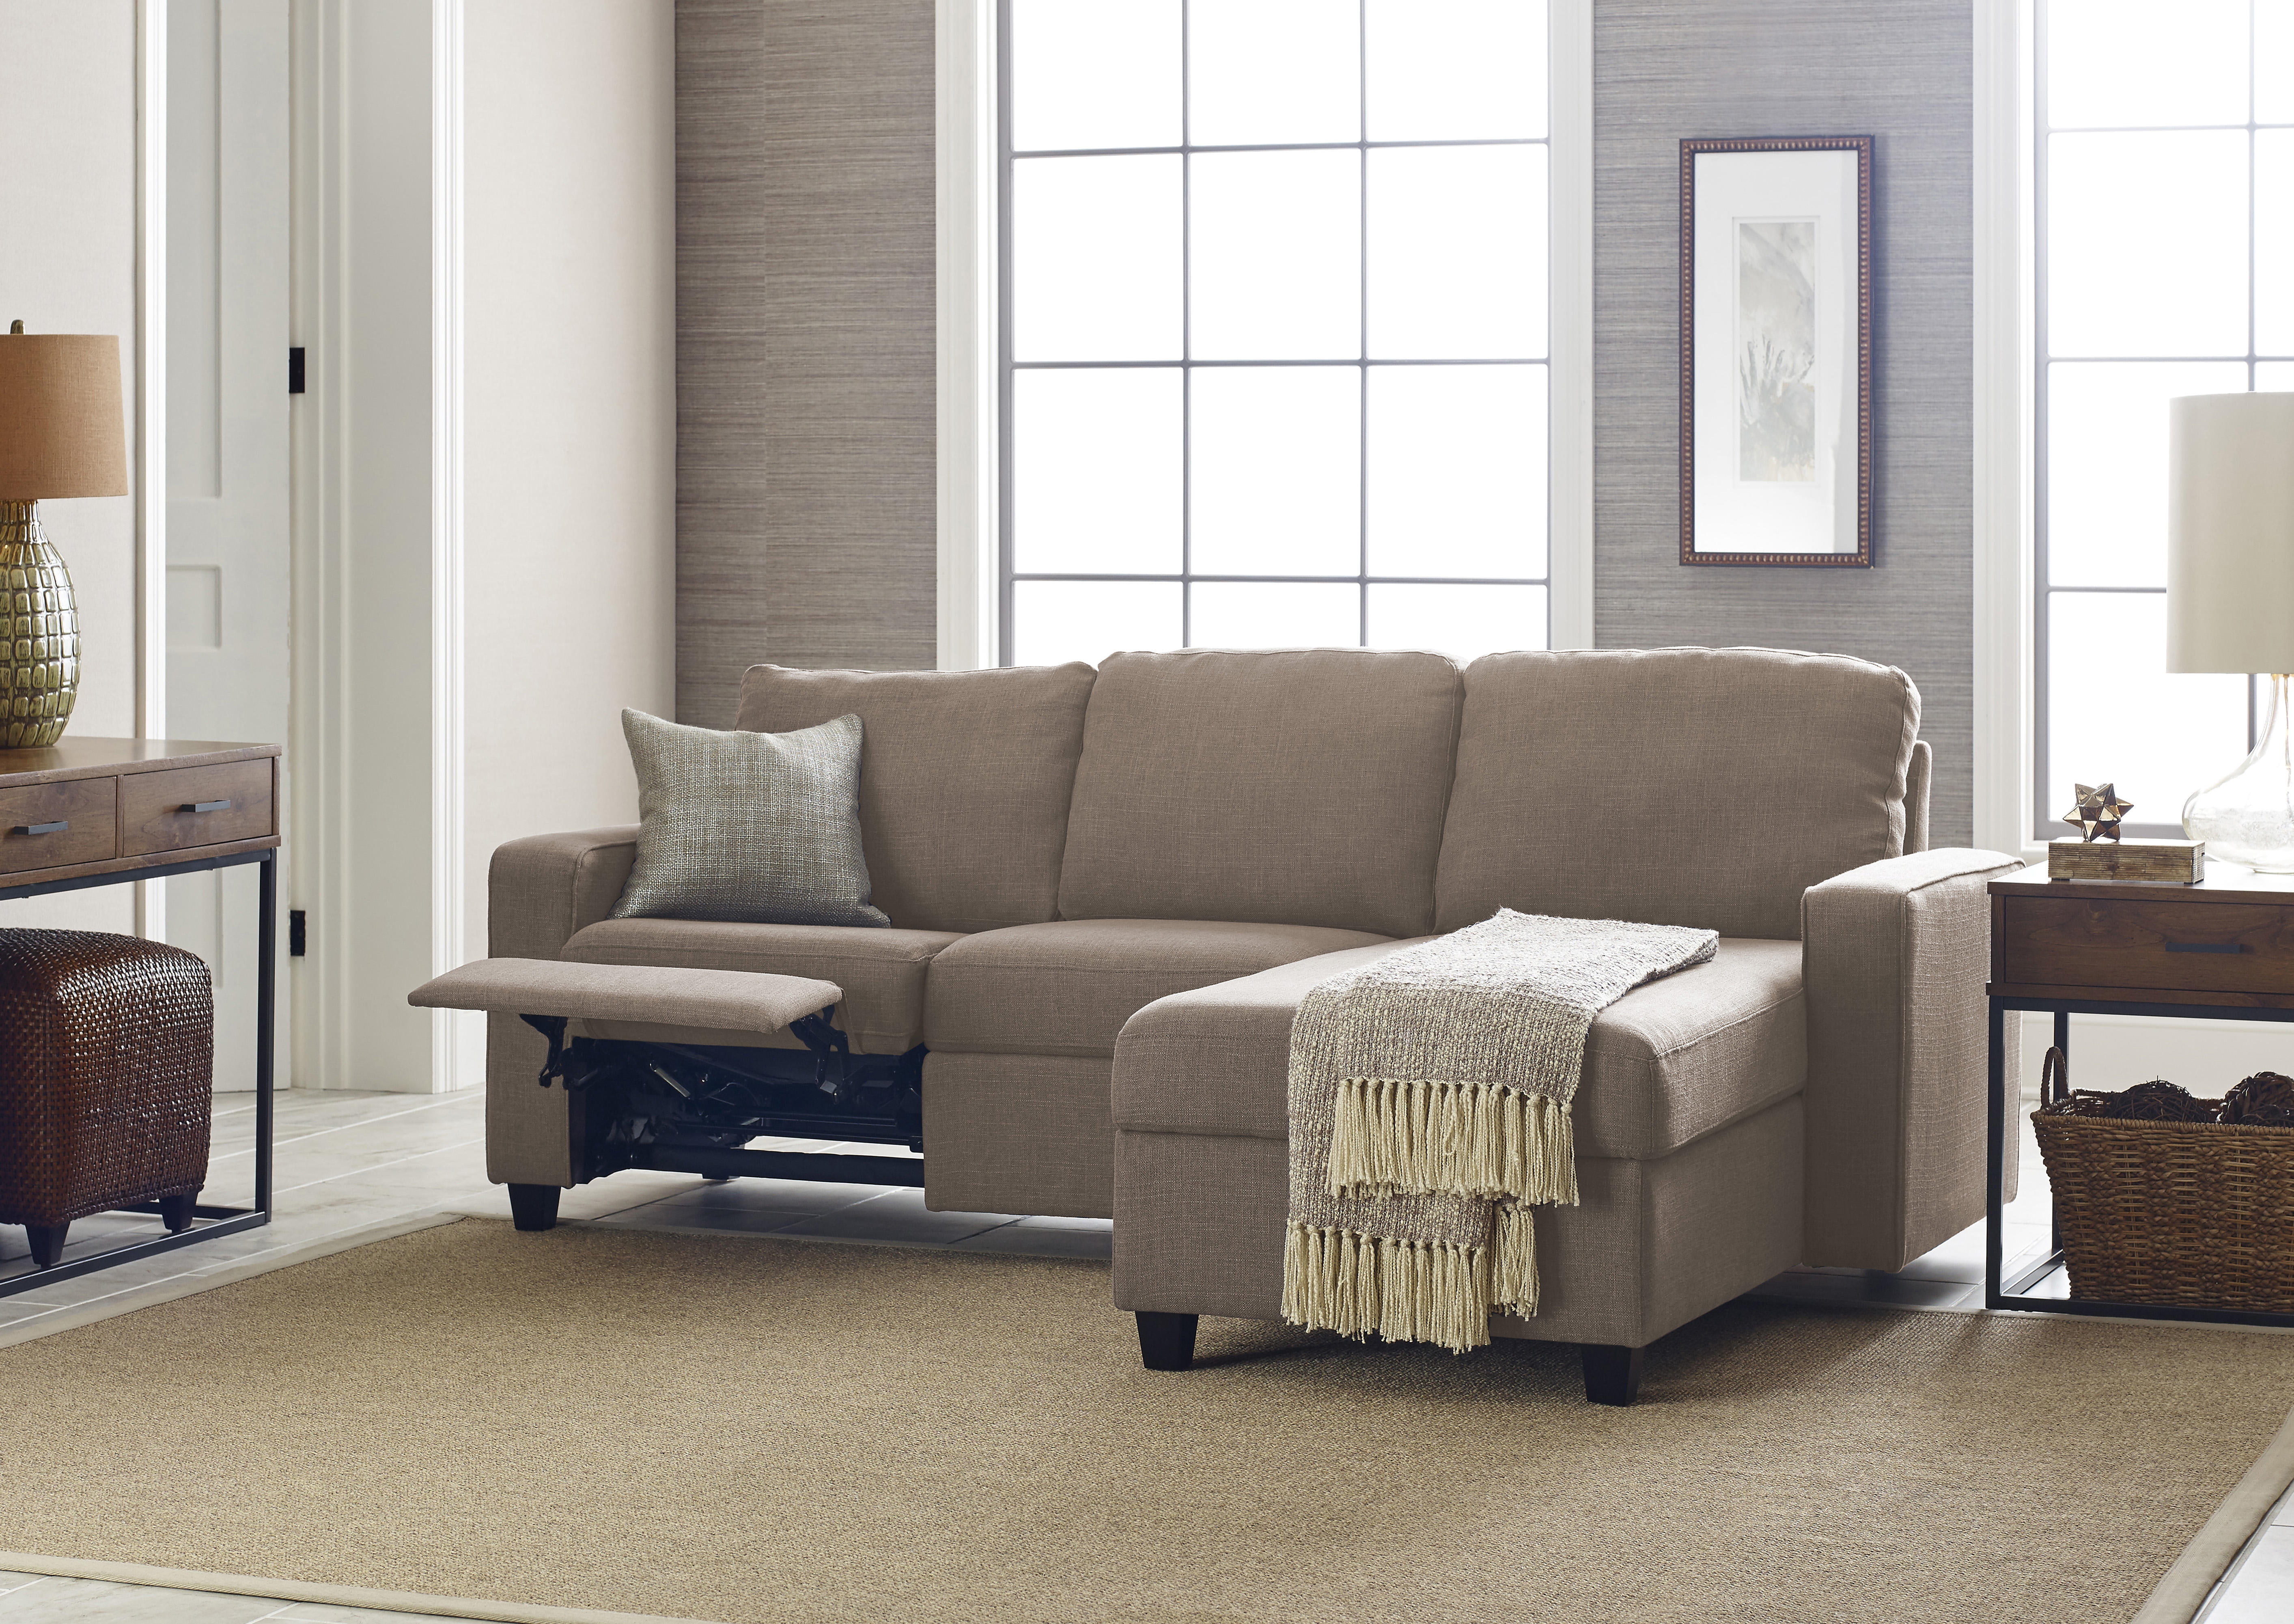 Serta Palisades Reclining Sectional with Right Storage